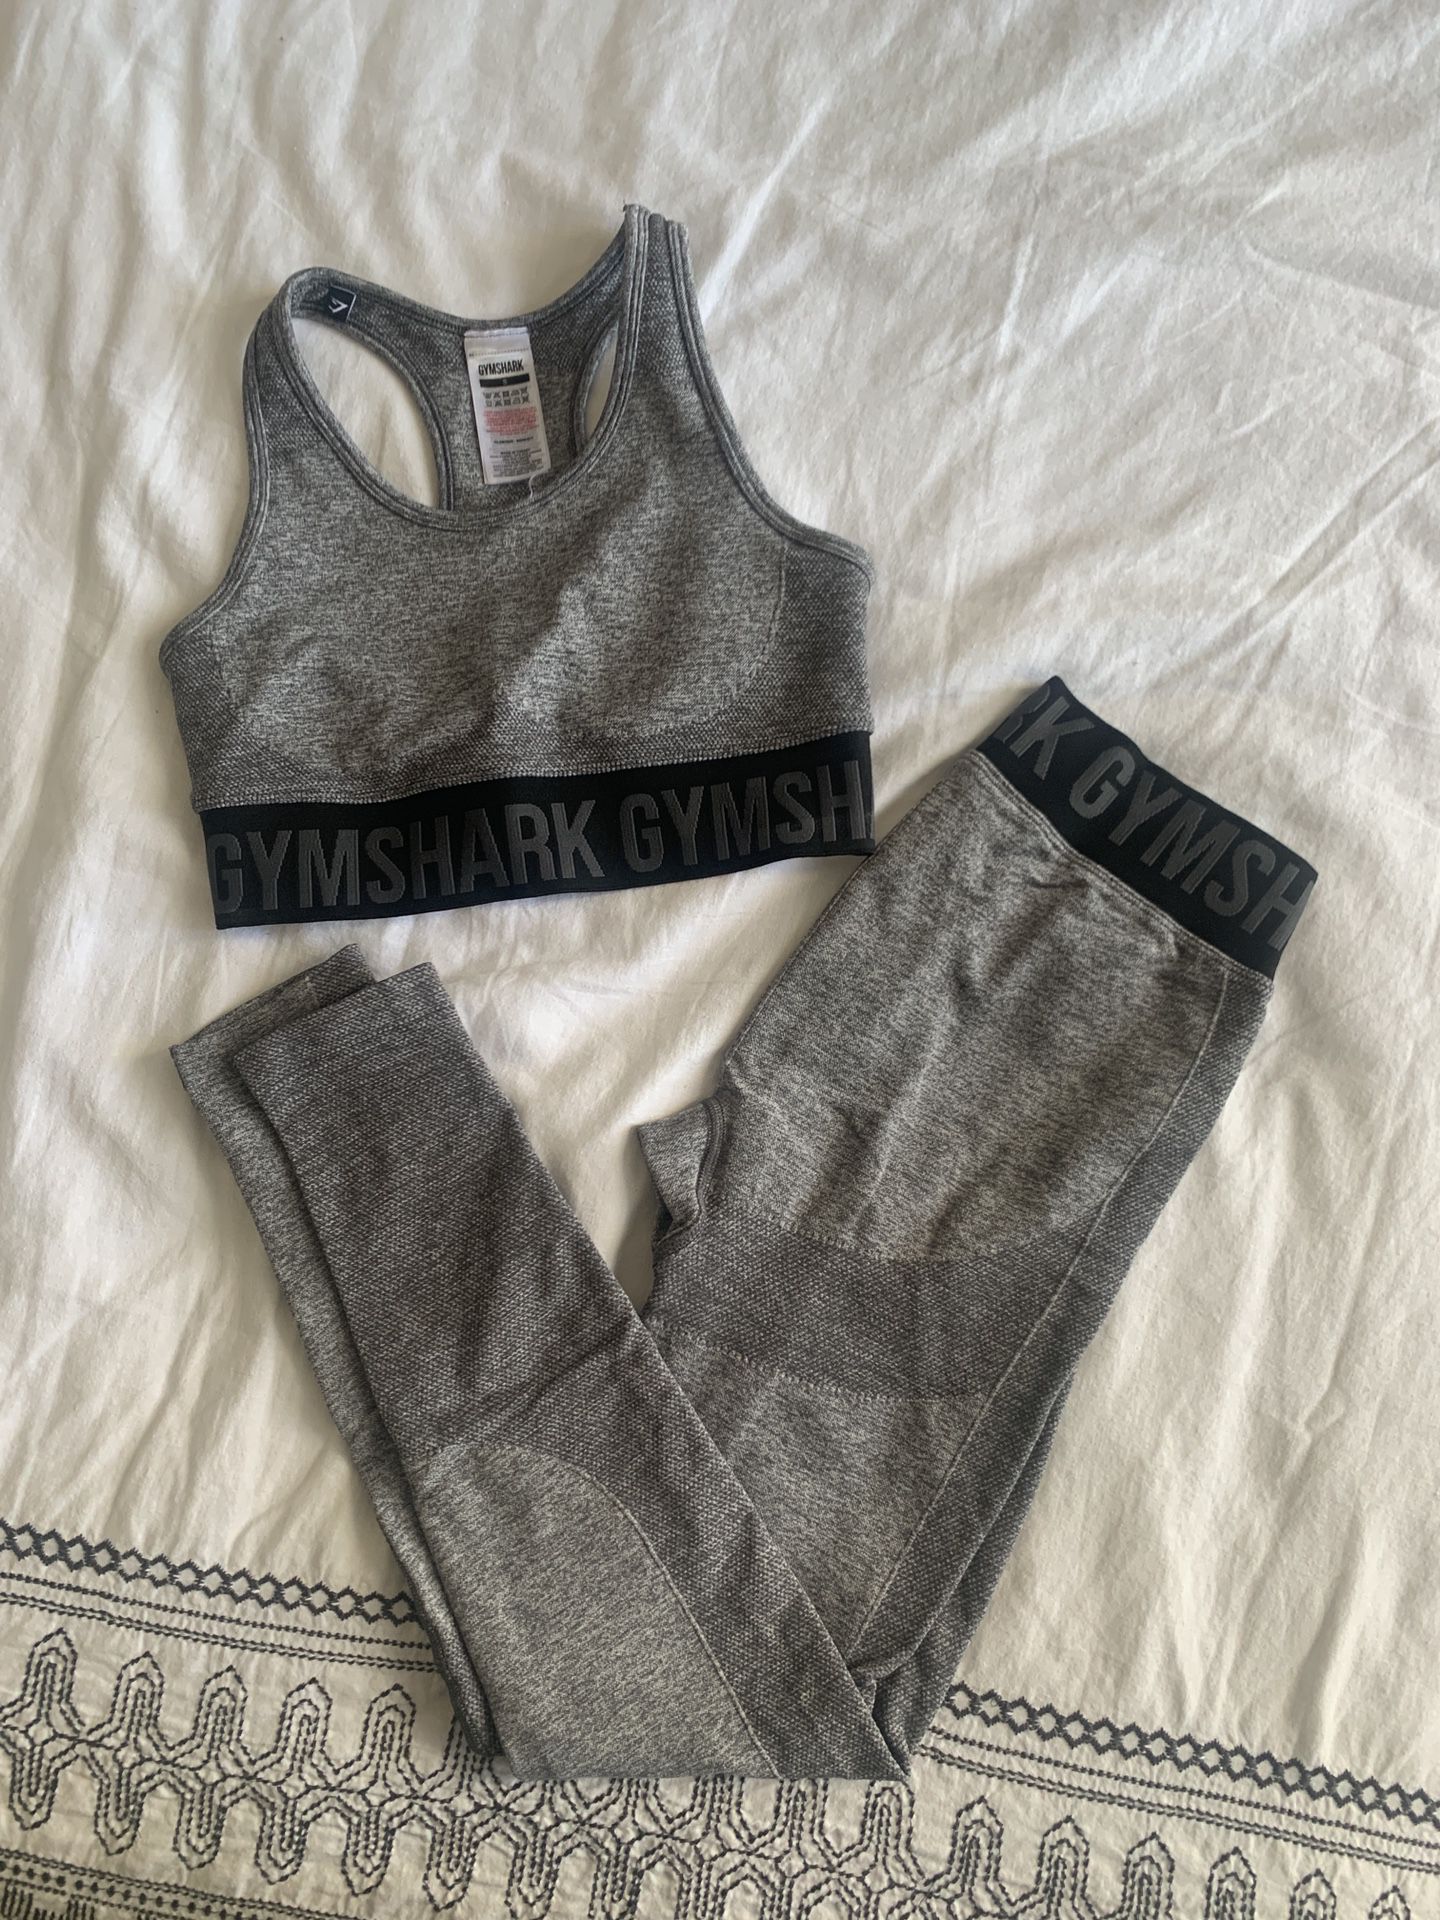 Gymshark Leggings - Small -New for Sale in San Diego, CA - OfferUp